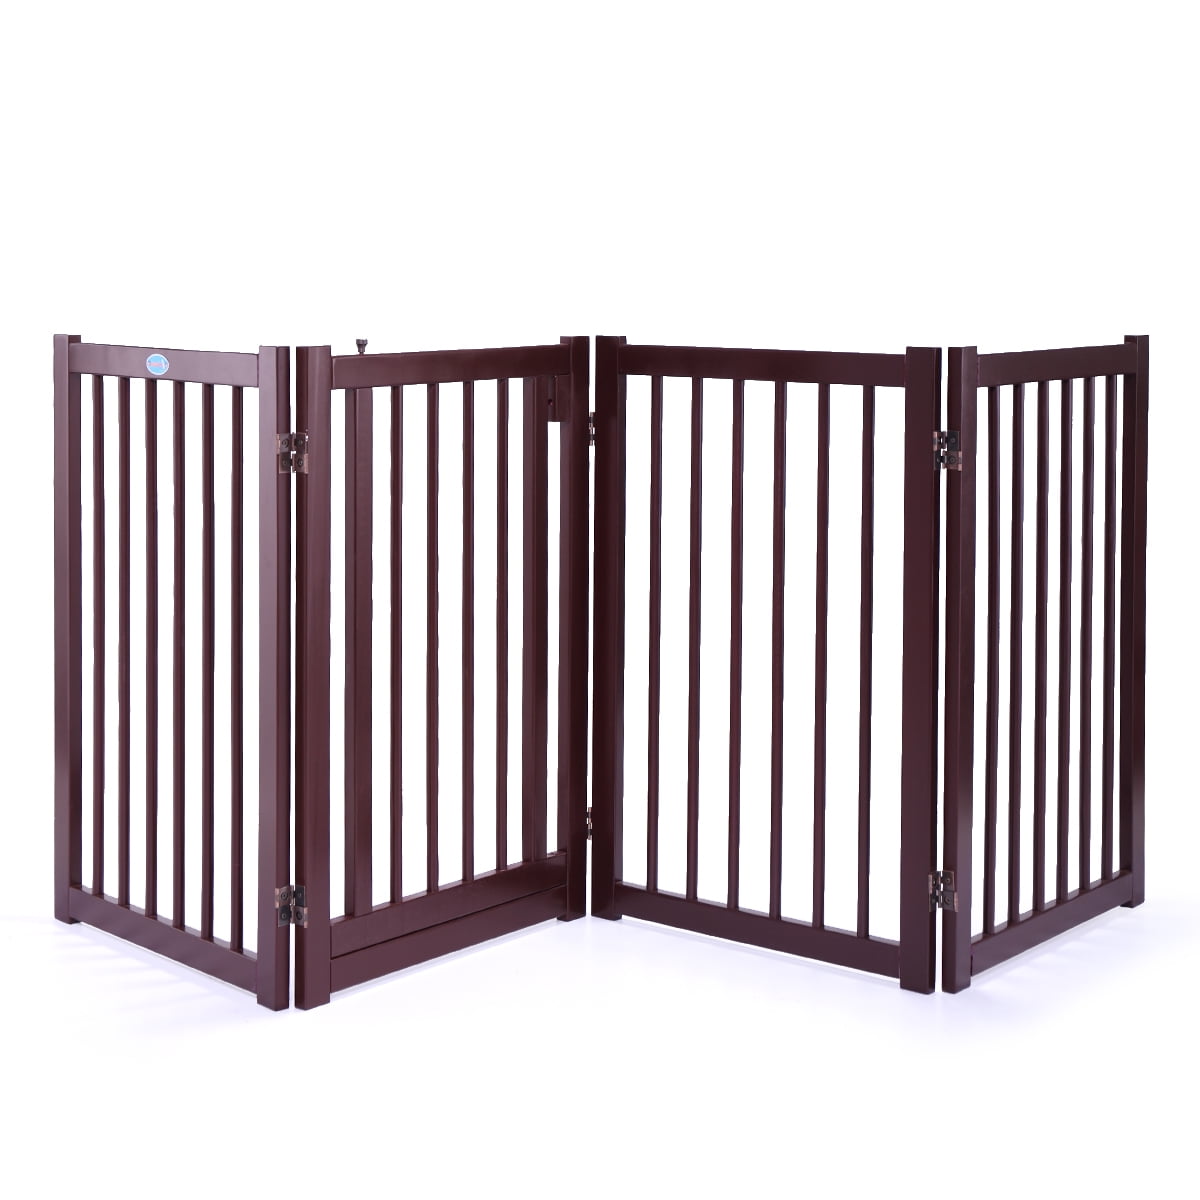 Dog Puppy Gate Fence for Indoor Houes Stairs Doorway JAXPETY Freestanding Wooden Pet Gate for Dogs 5 Panel 17.5-Inch Tall 